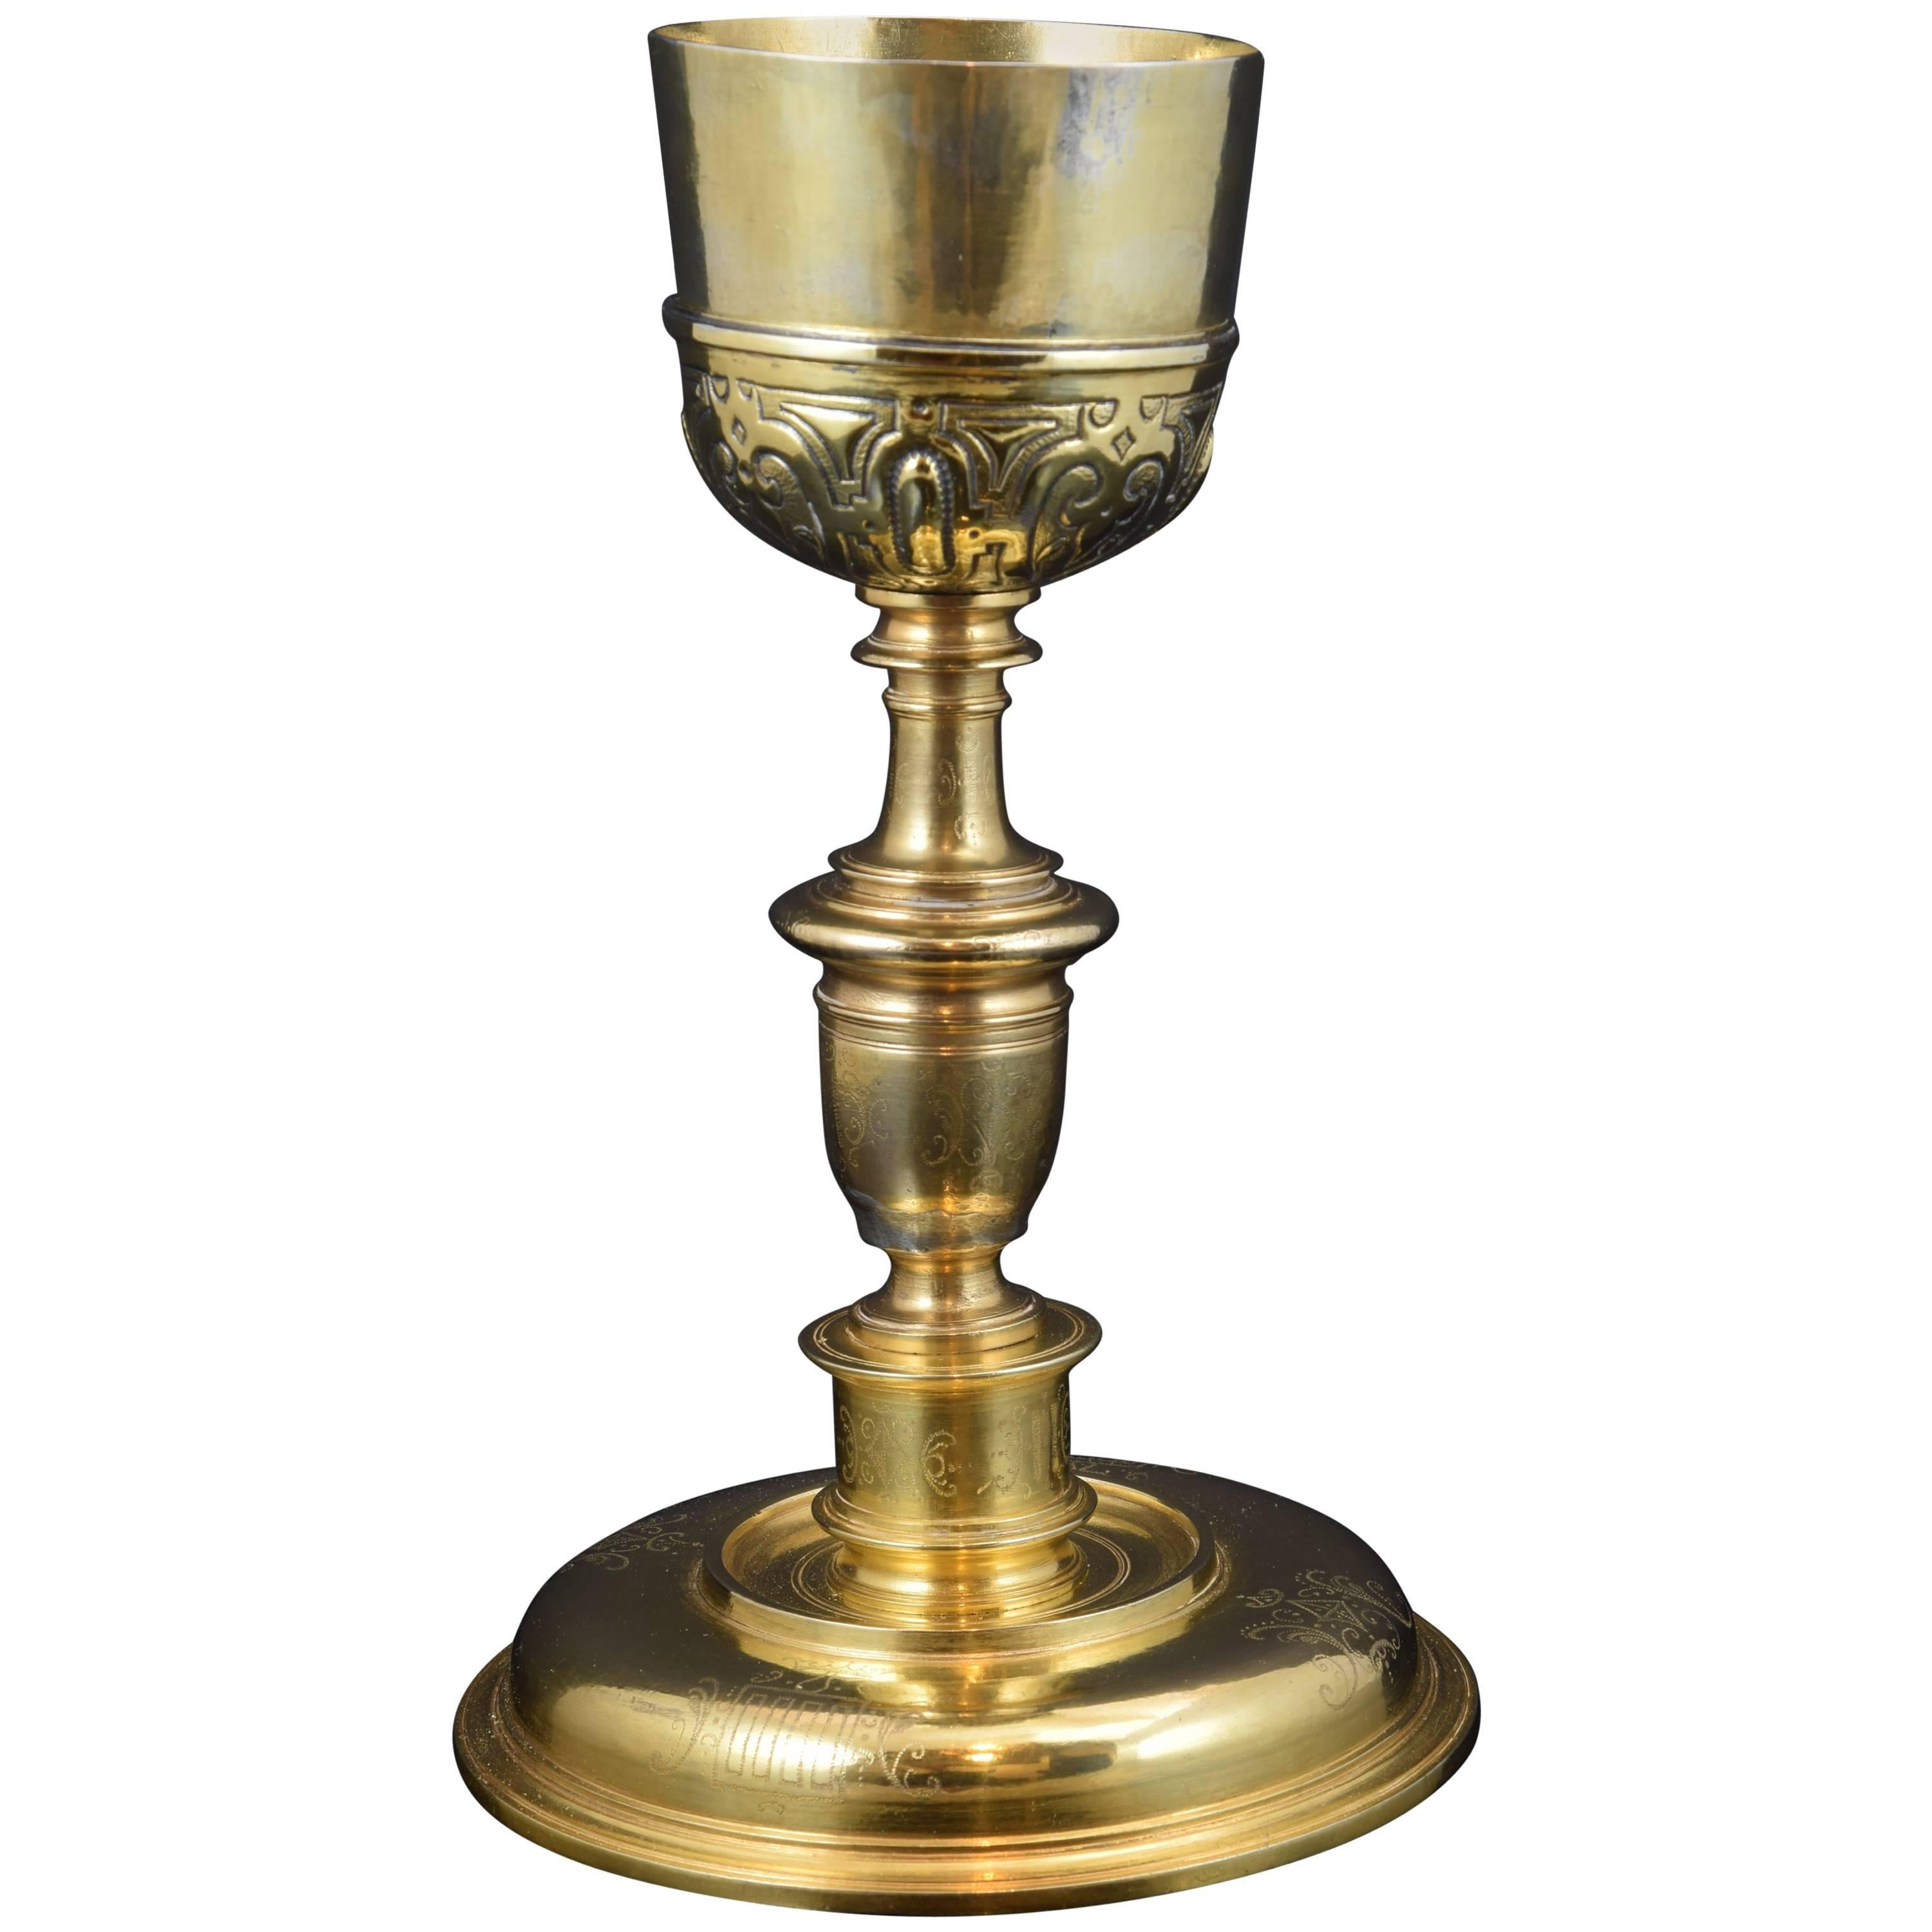 Chalice, Gilt Bronze and Gilt Silver with Restorations, Spain, 17th Century